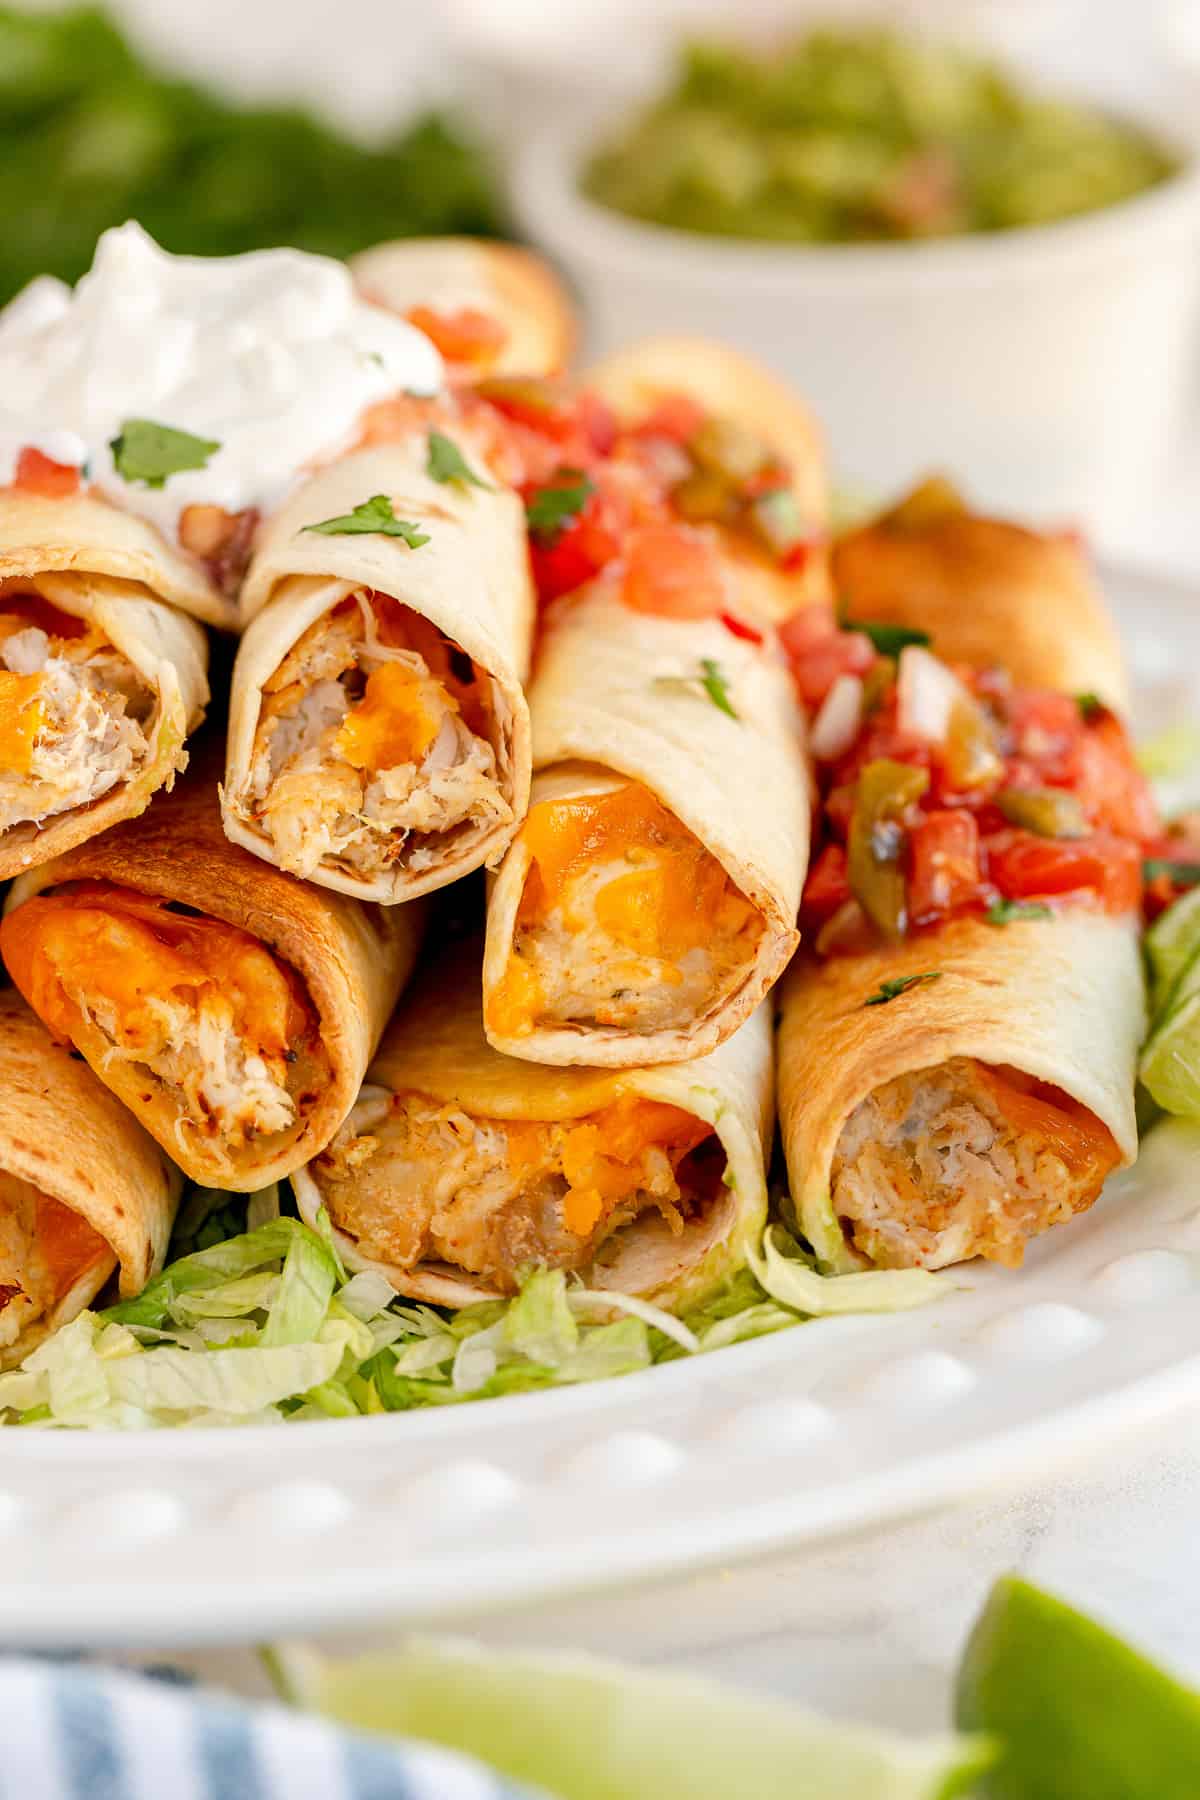 An eye level view of chicken taquitos on a plate.